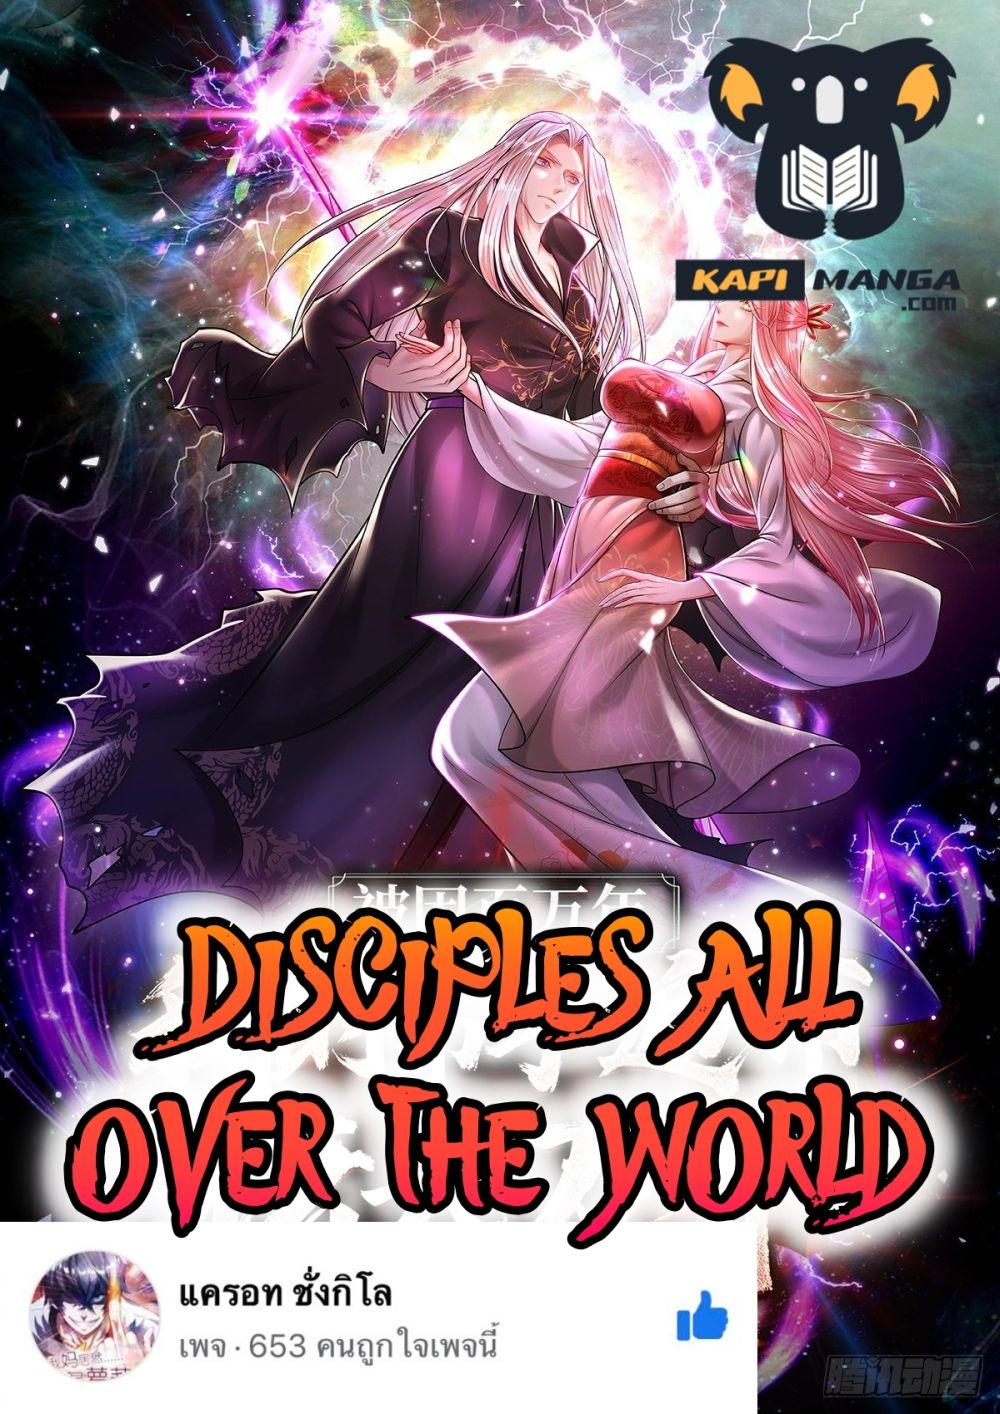 Disciples All Over the World à¸à¸­à¸à¸à¸µà¹ 22 (1)